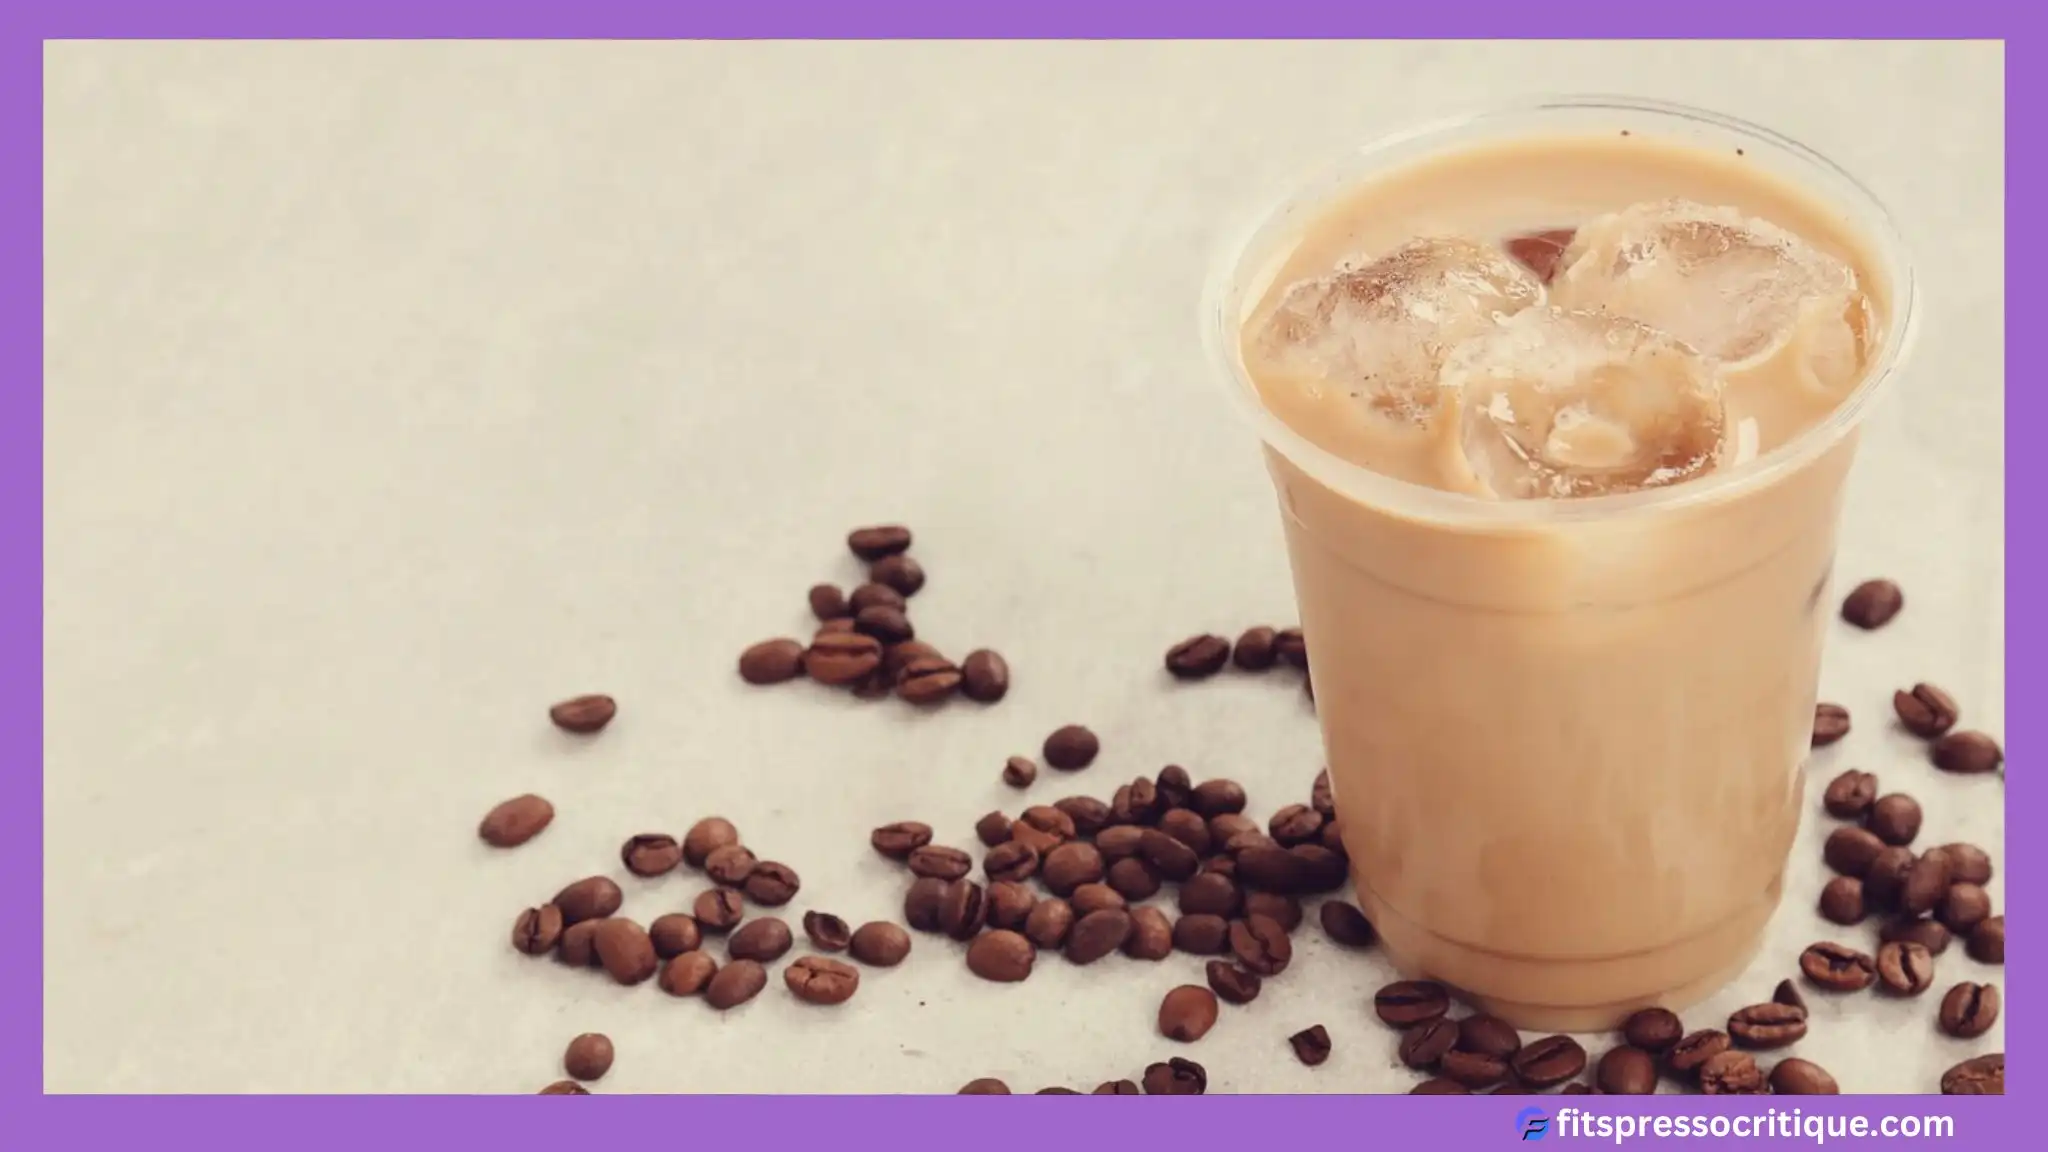 Benefits Of Iced Coffee For Weight Loss